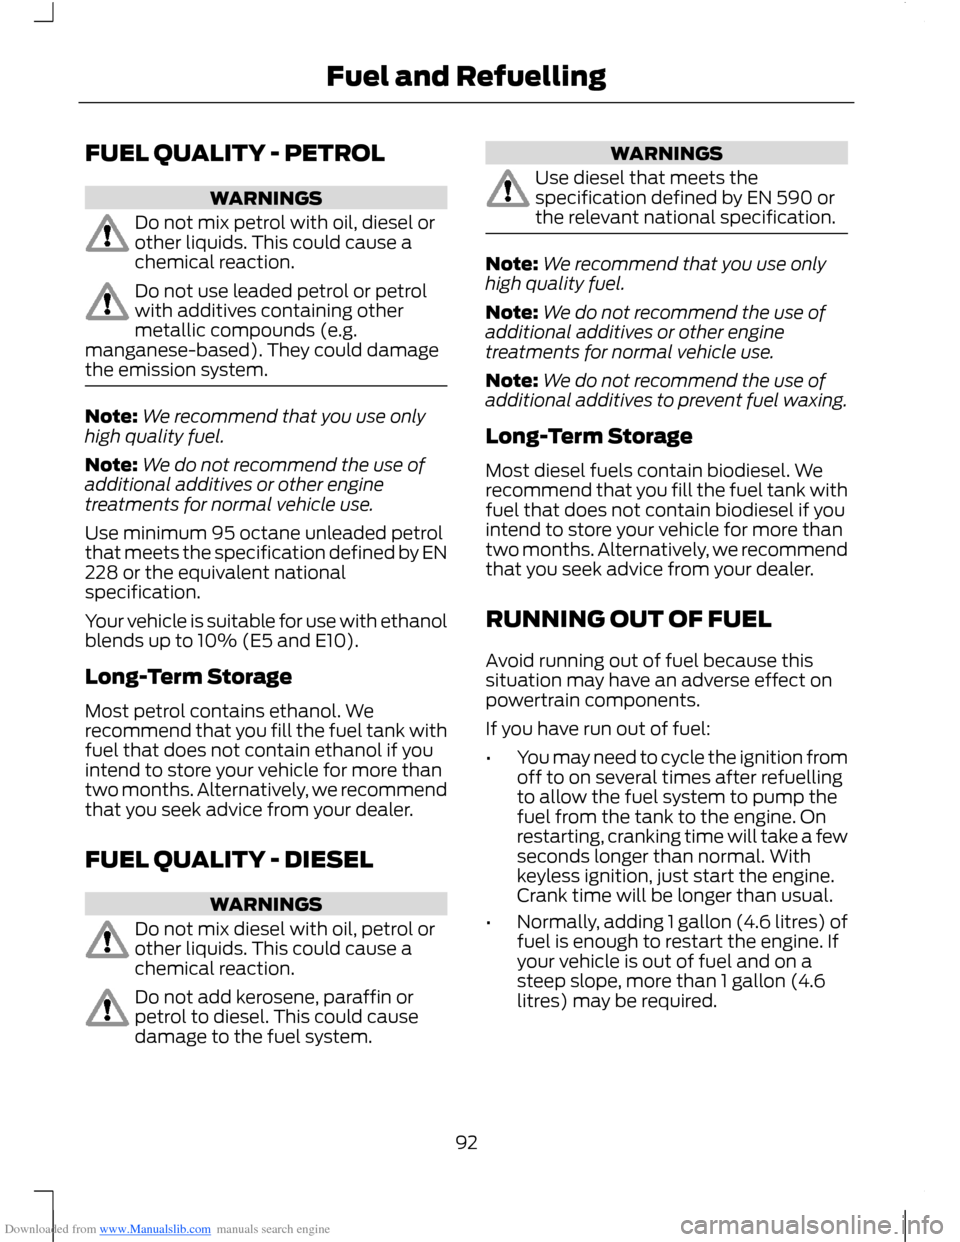 FORD B MAX 2012 1.G Owners Manual Downloaded from www.Manualslib.com manuals search engine FUEL QUALITY - PETROL
WARNINGS
Do not mix petrol with oil, diesel orother liquids. This could cause achemical reaction.
Do not use leaded petro